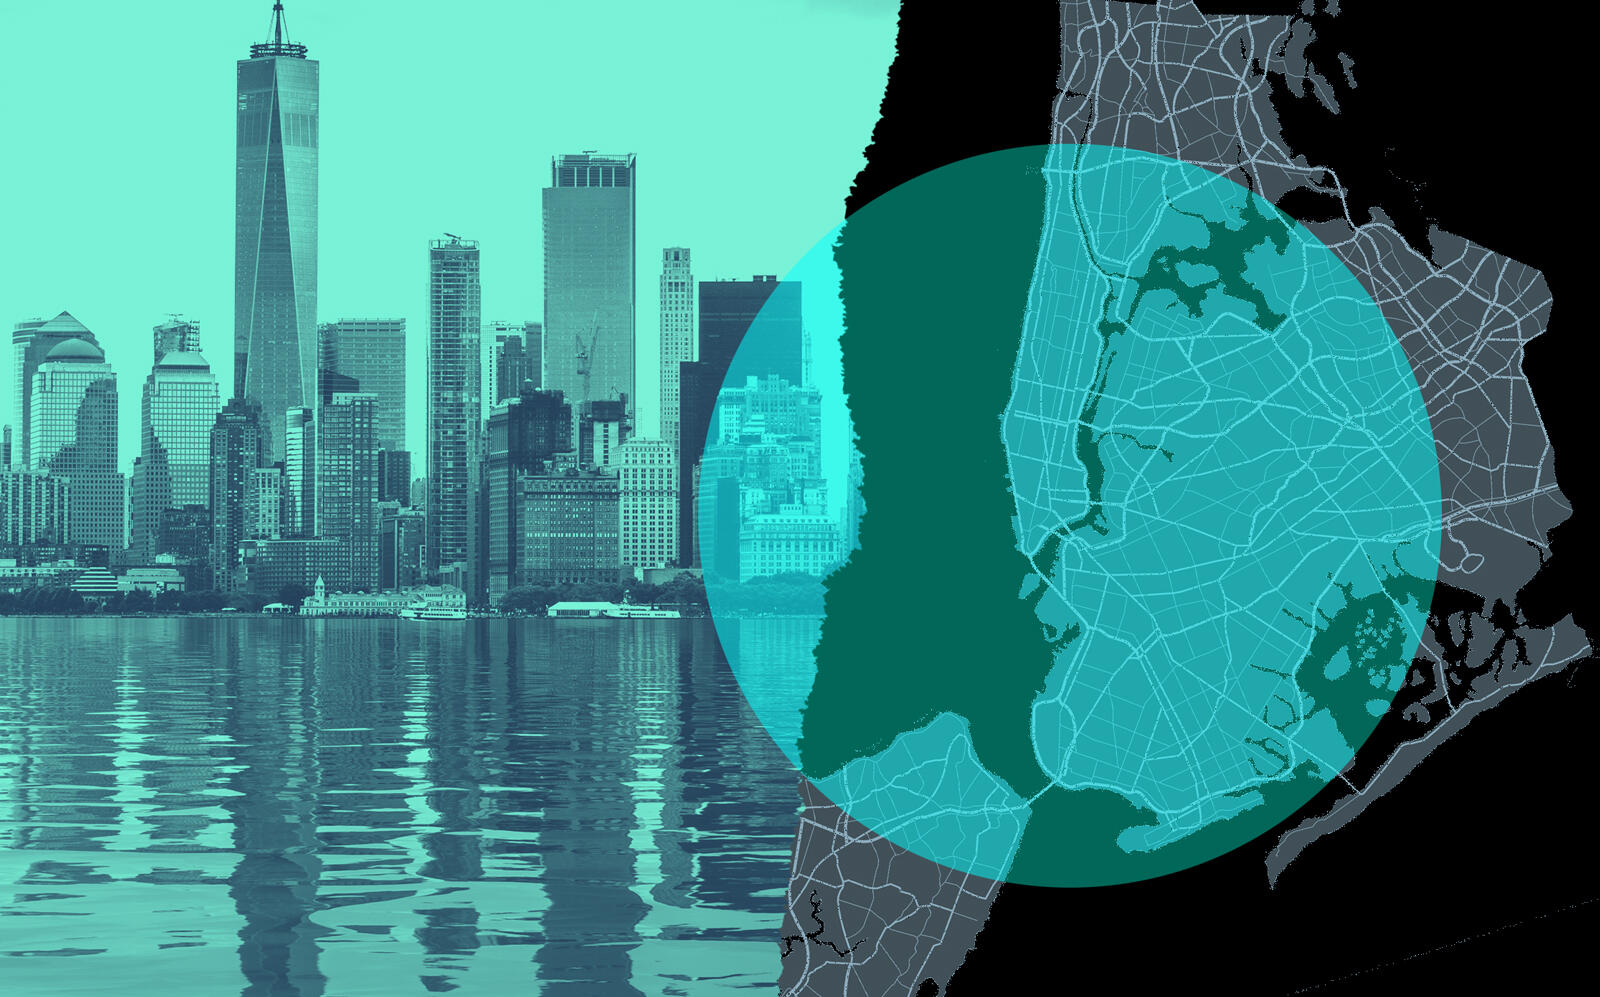 New flood maps are on the way in New York City, which could pose challenges for both developers and residents. (iStock)